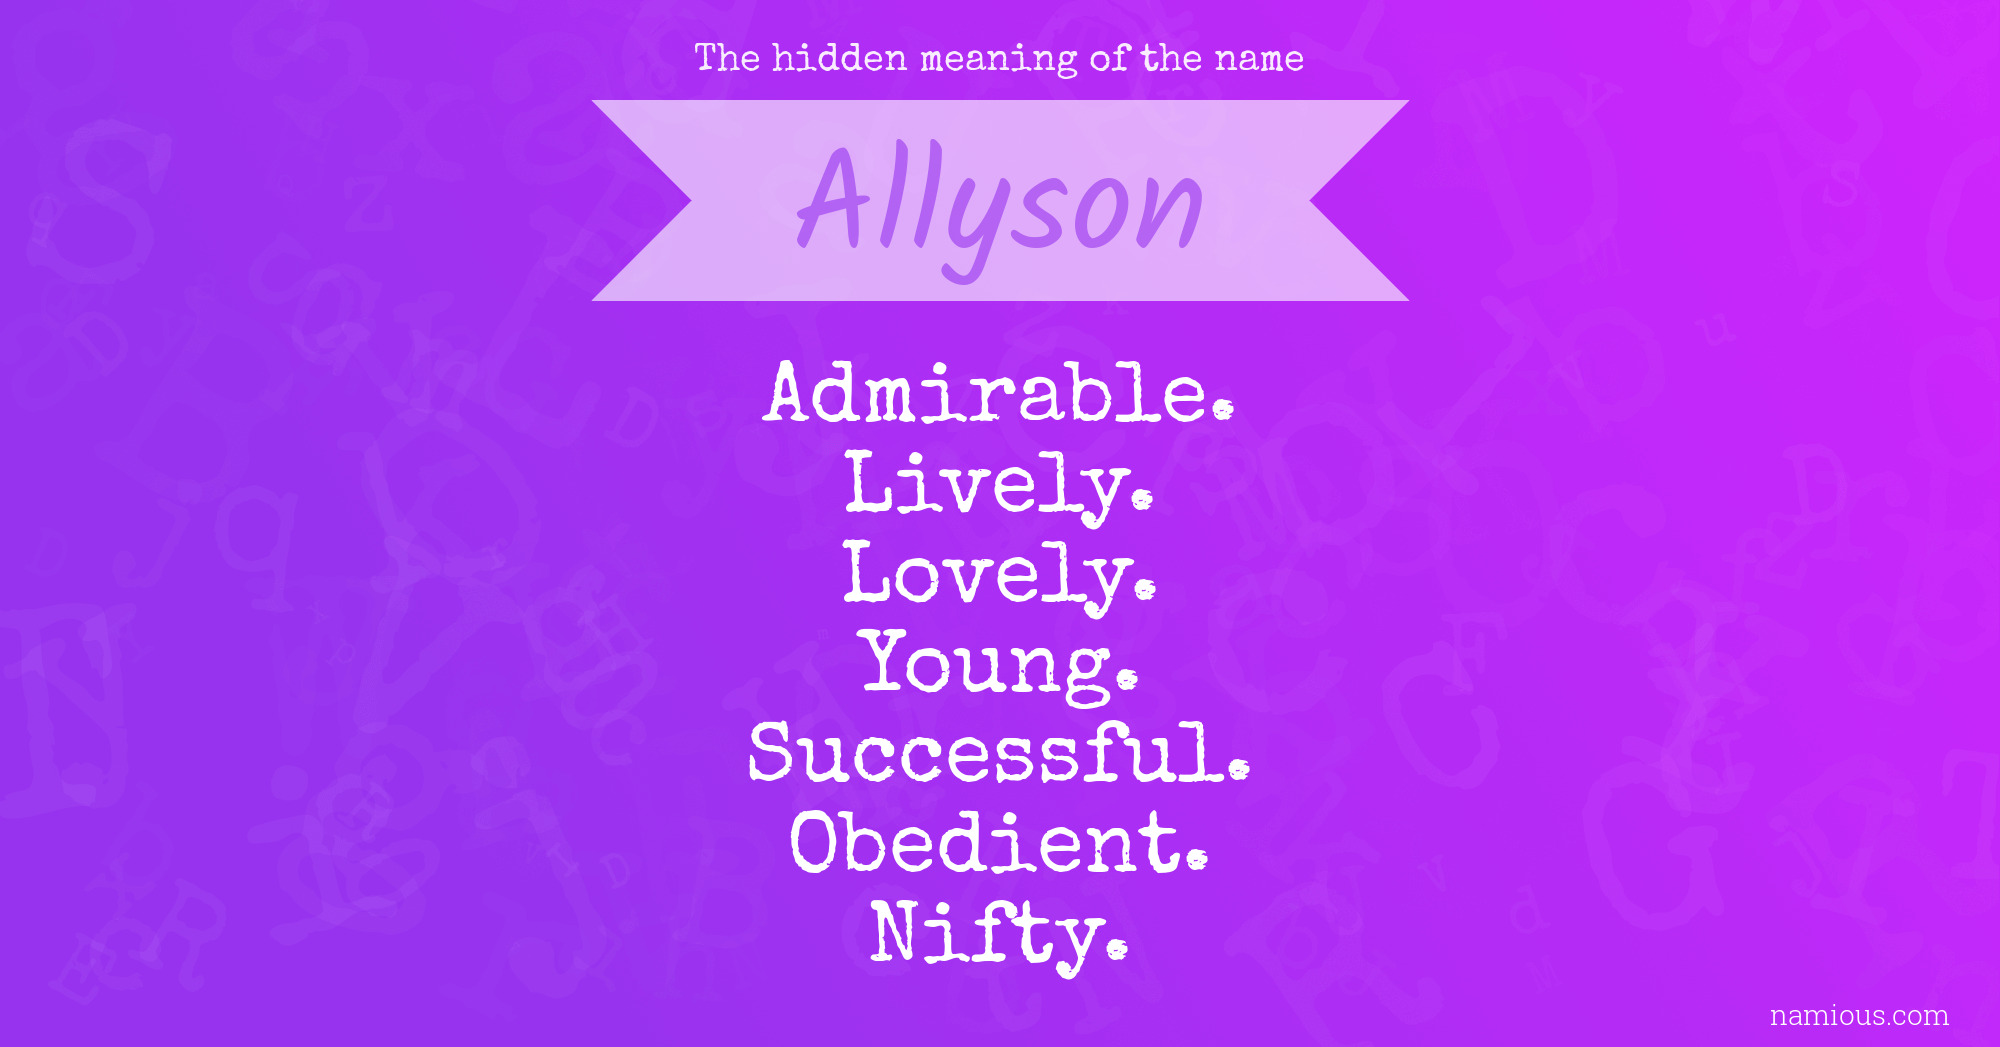 The hidden meaning of the name Allyson